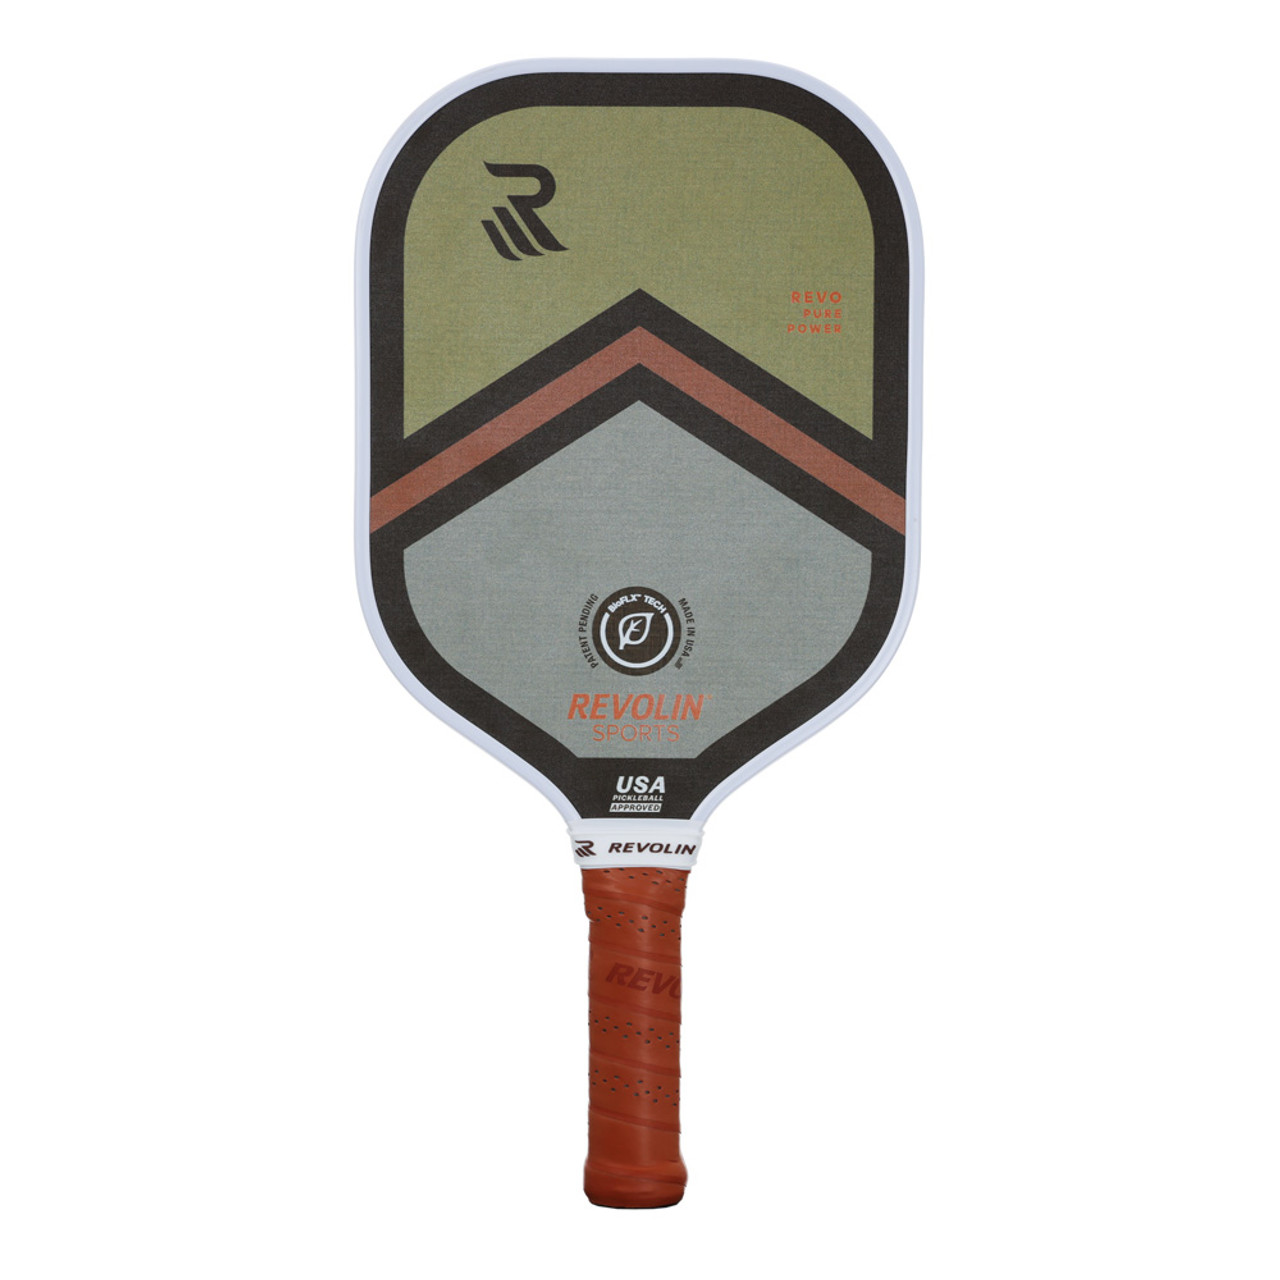 Is a Thicker Pickleball Paddle Better